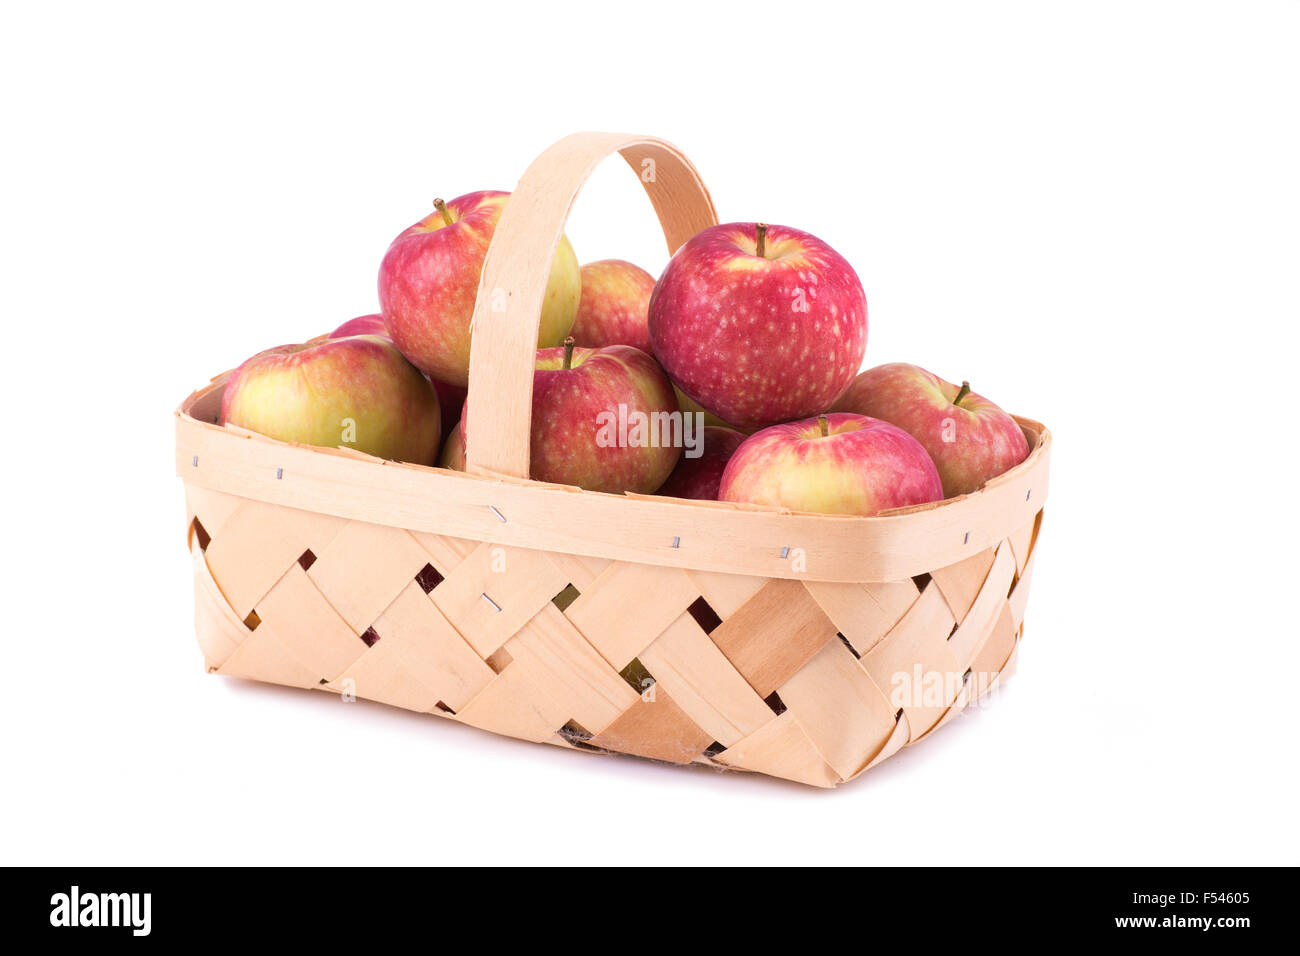 Fresh apples in a wooden basket, on white background Stock Photo